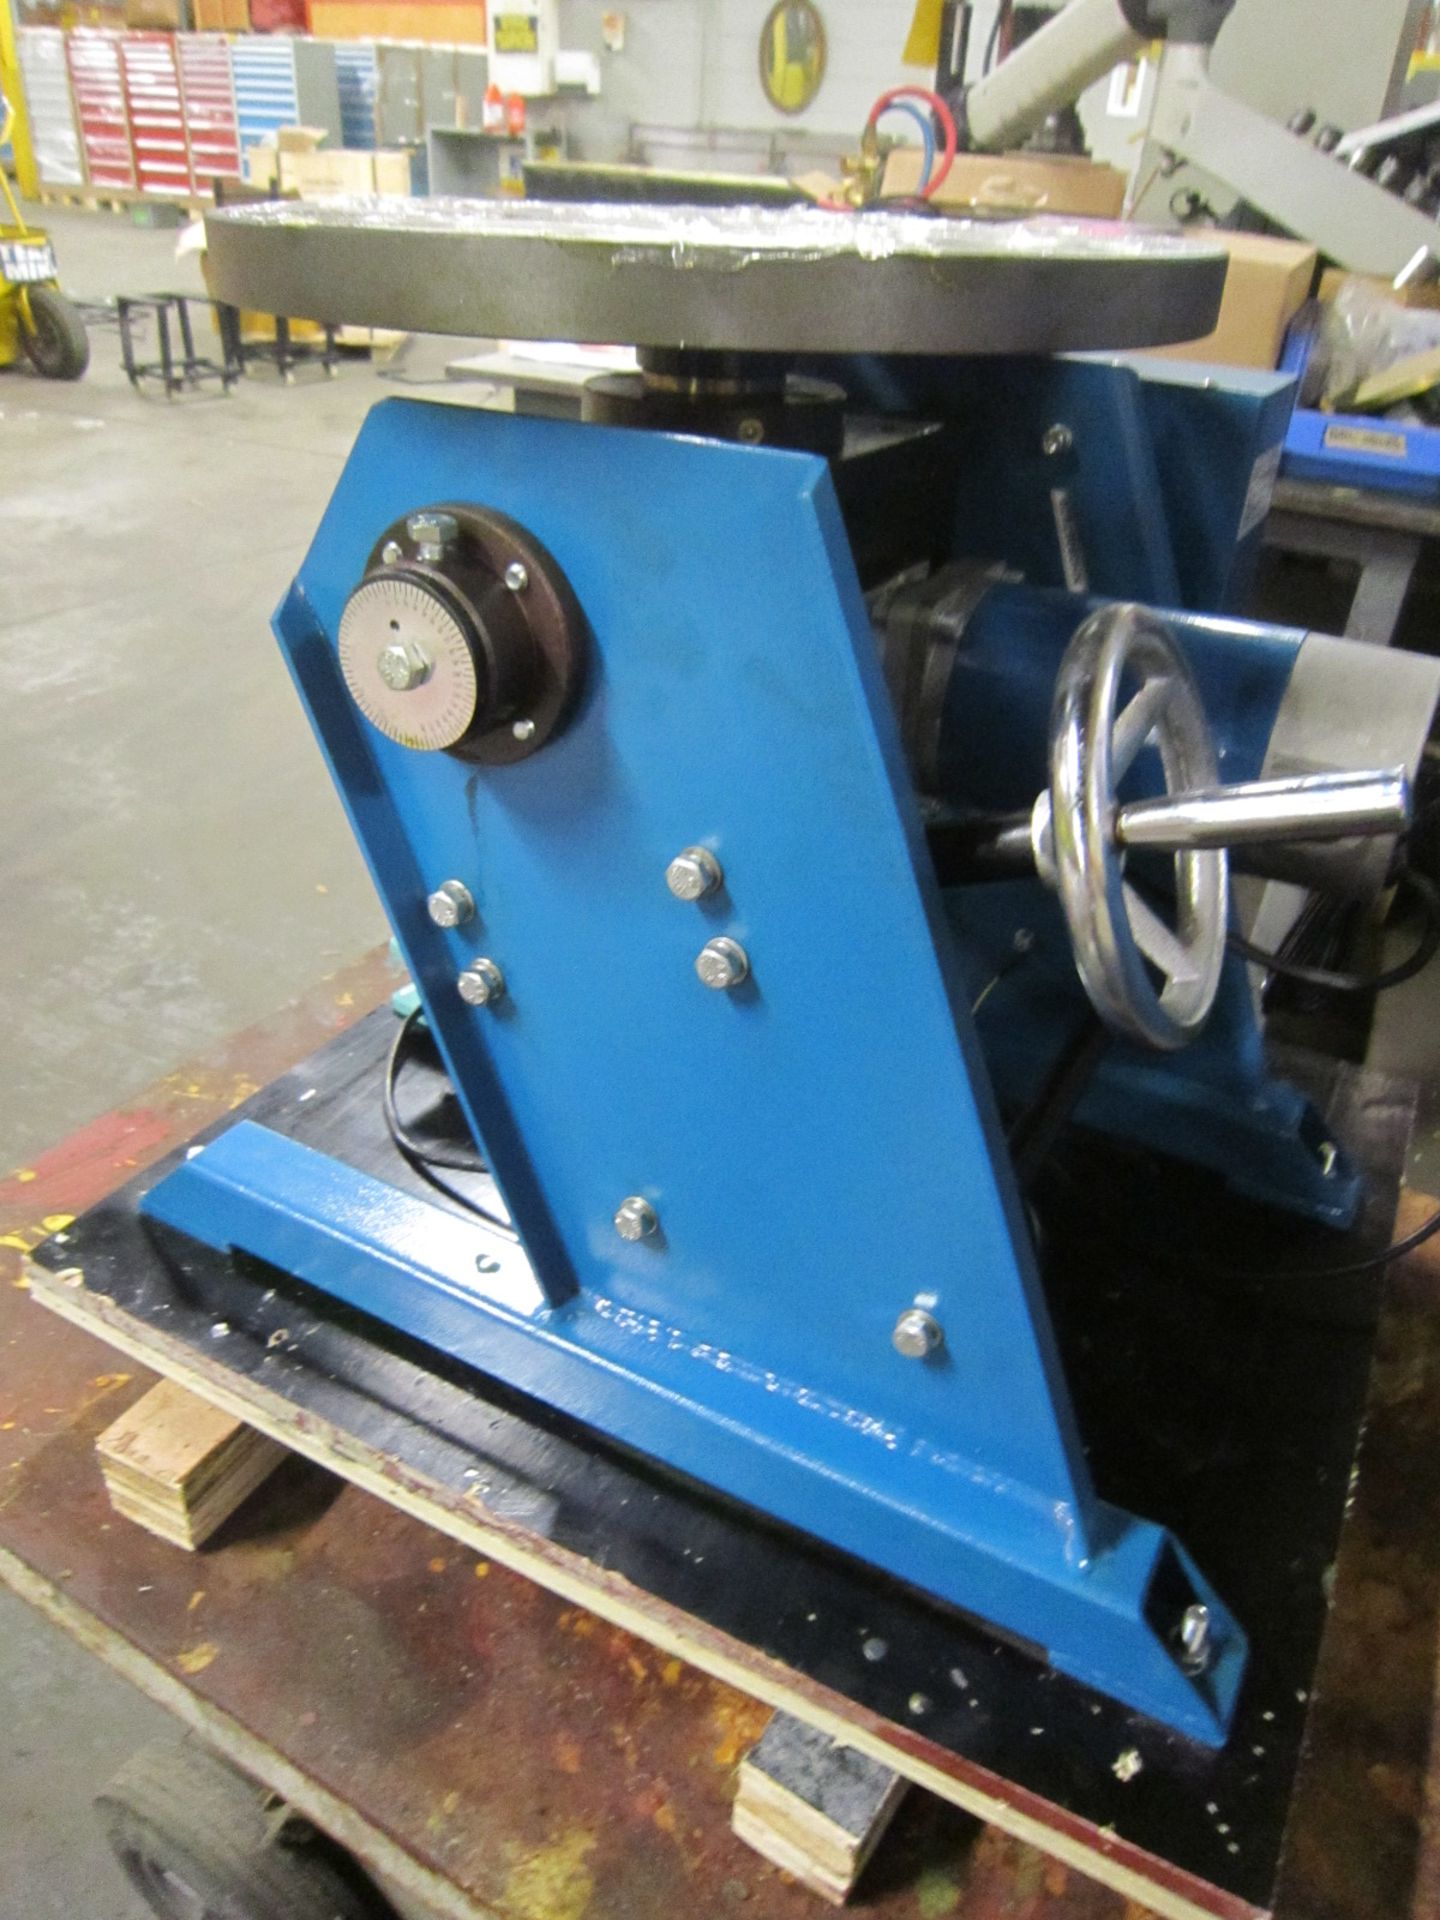 Verner model VD-300 WELDING POSITIONER 300lbs capacity - tilt and rotate with variable speed drive - Image 2 of 2